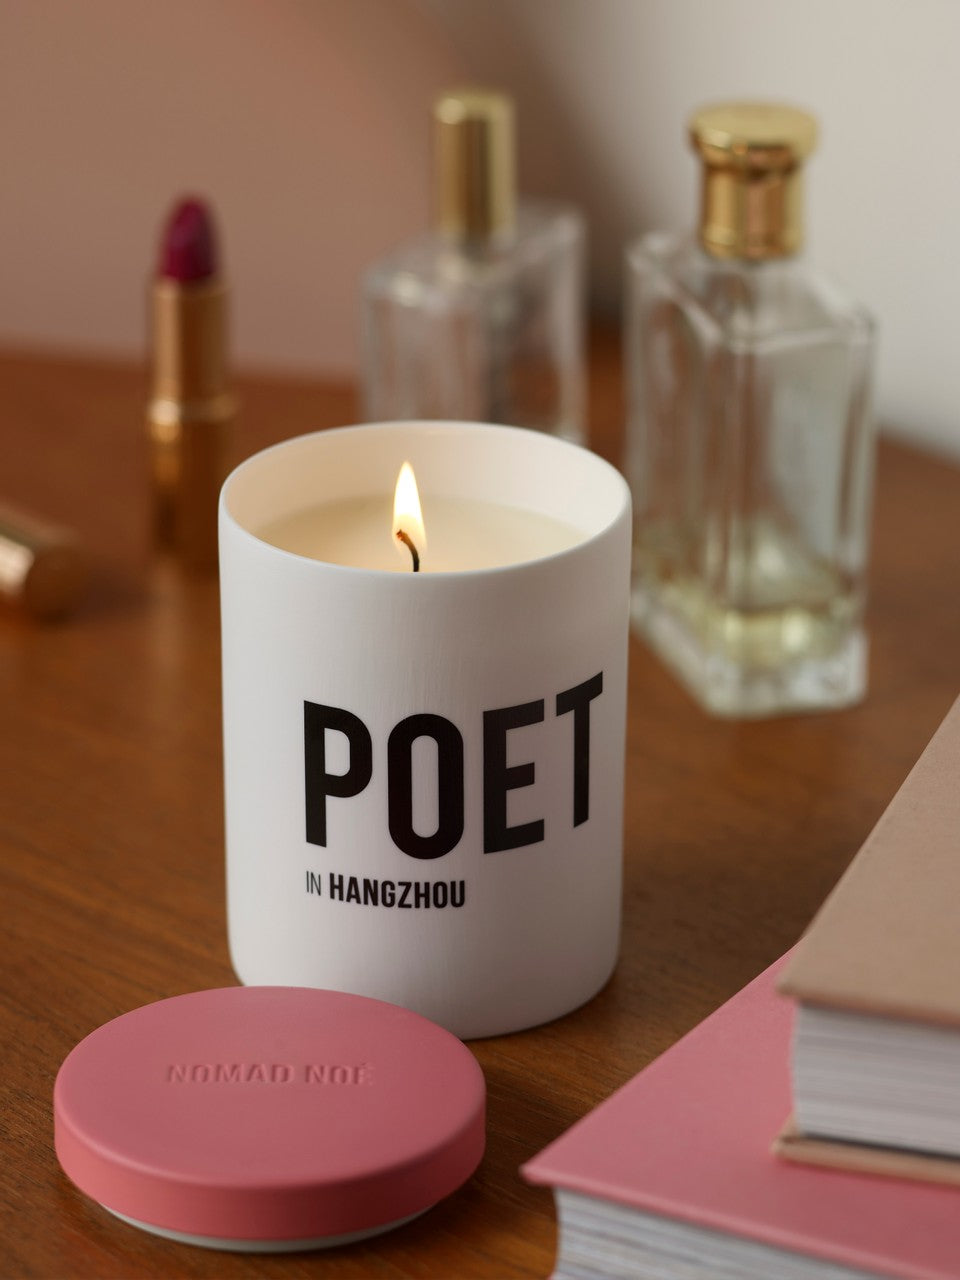 Poet Scented Candle